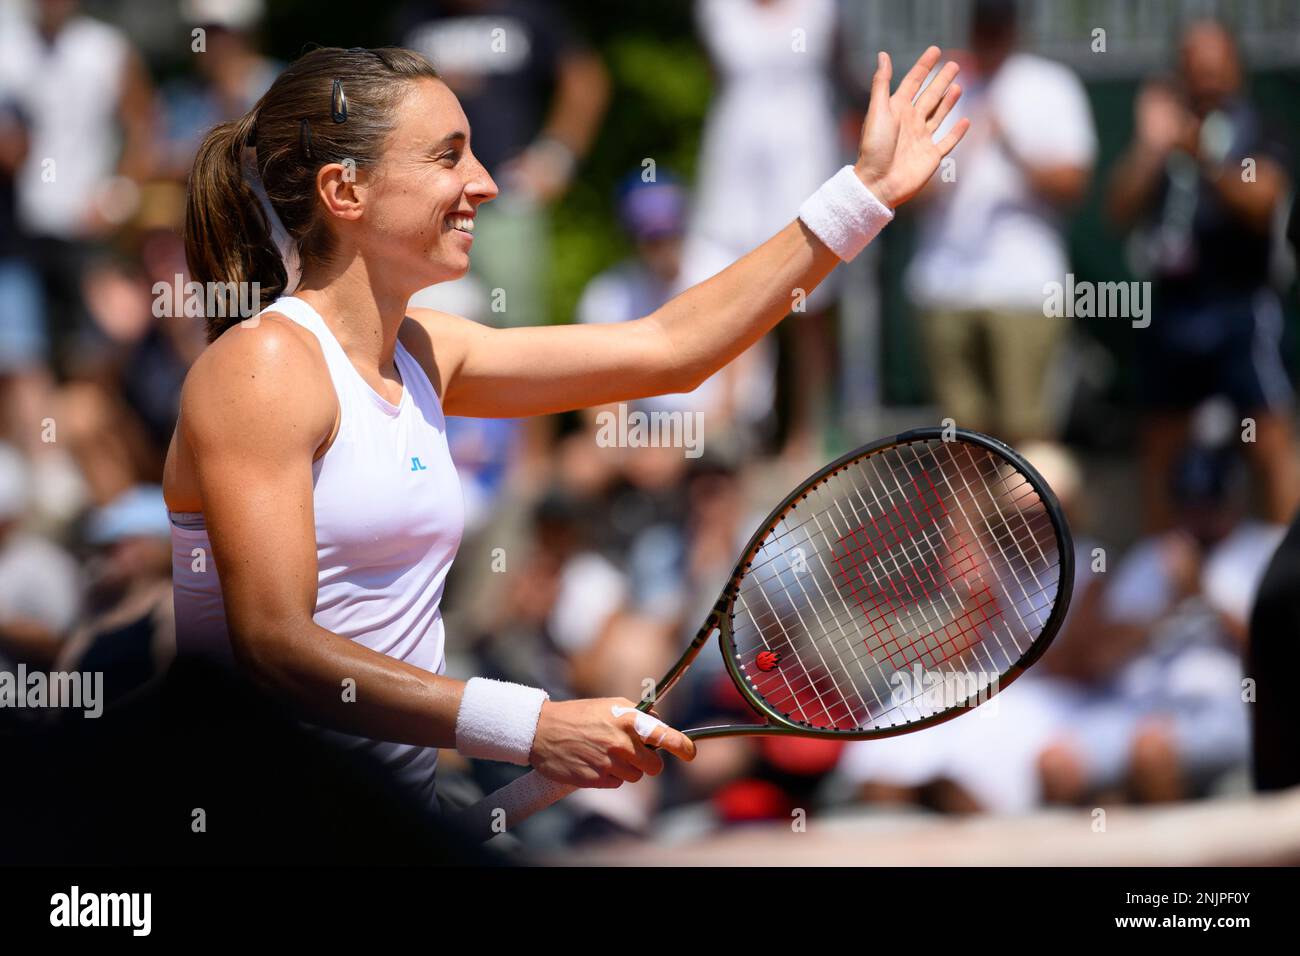 Croatias Petra Martic celebrates her victory against Frances Caroline Garcia during their semi final match at the WTA International Ladies Open Lausanne tennis tournament, in Lausanne, Switzerland, Saturday, July 16, 2022